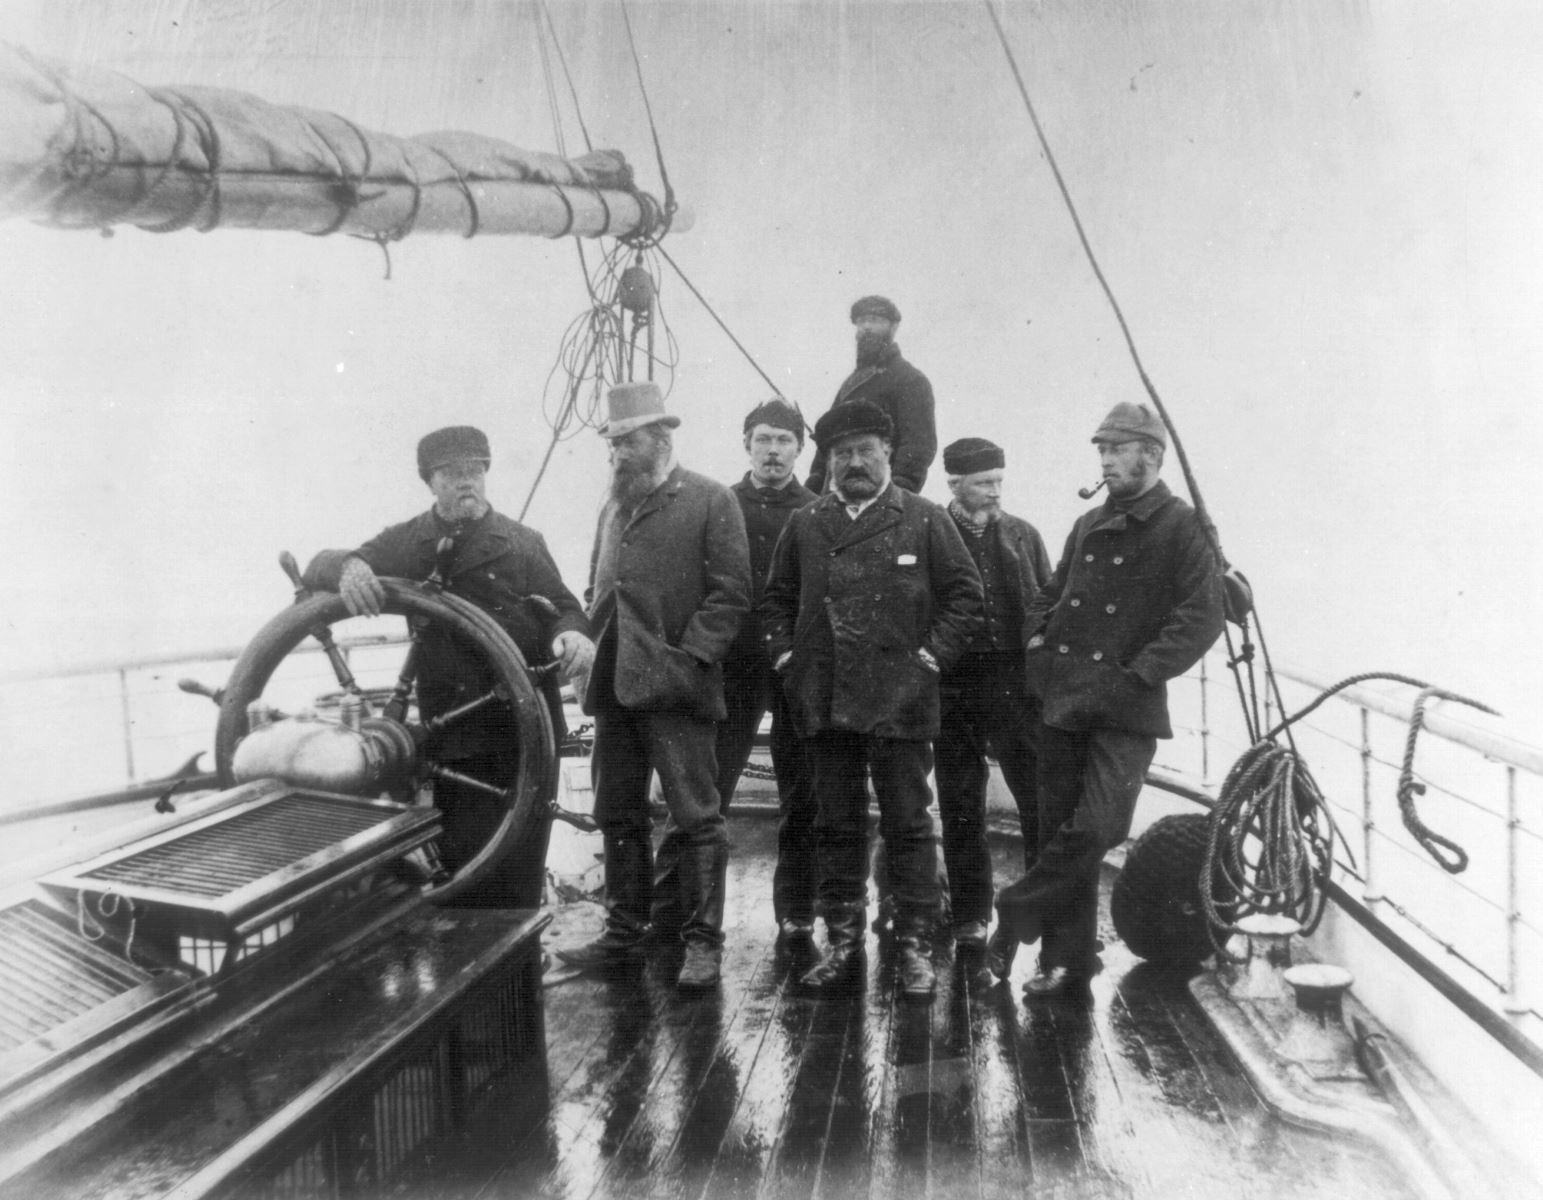 A group of men around the ships wheel on the boat